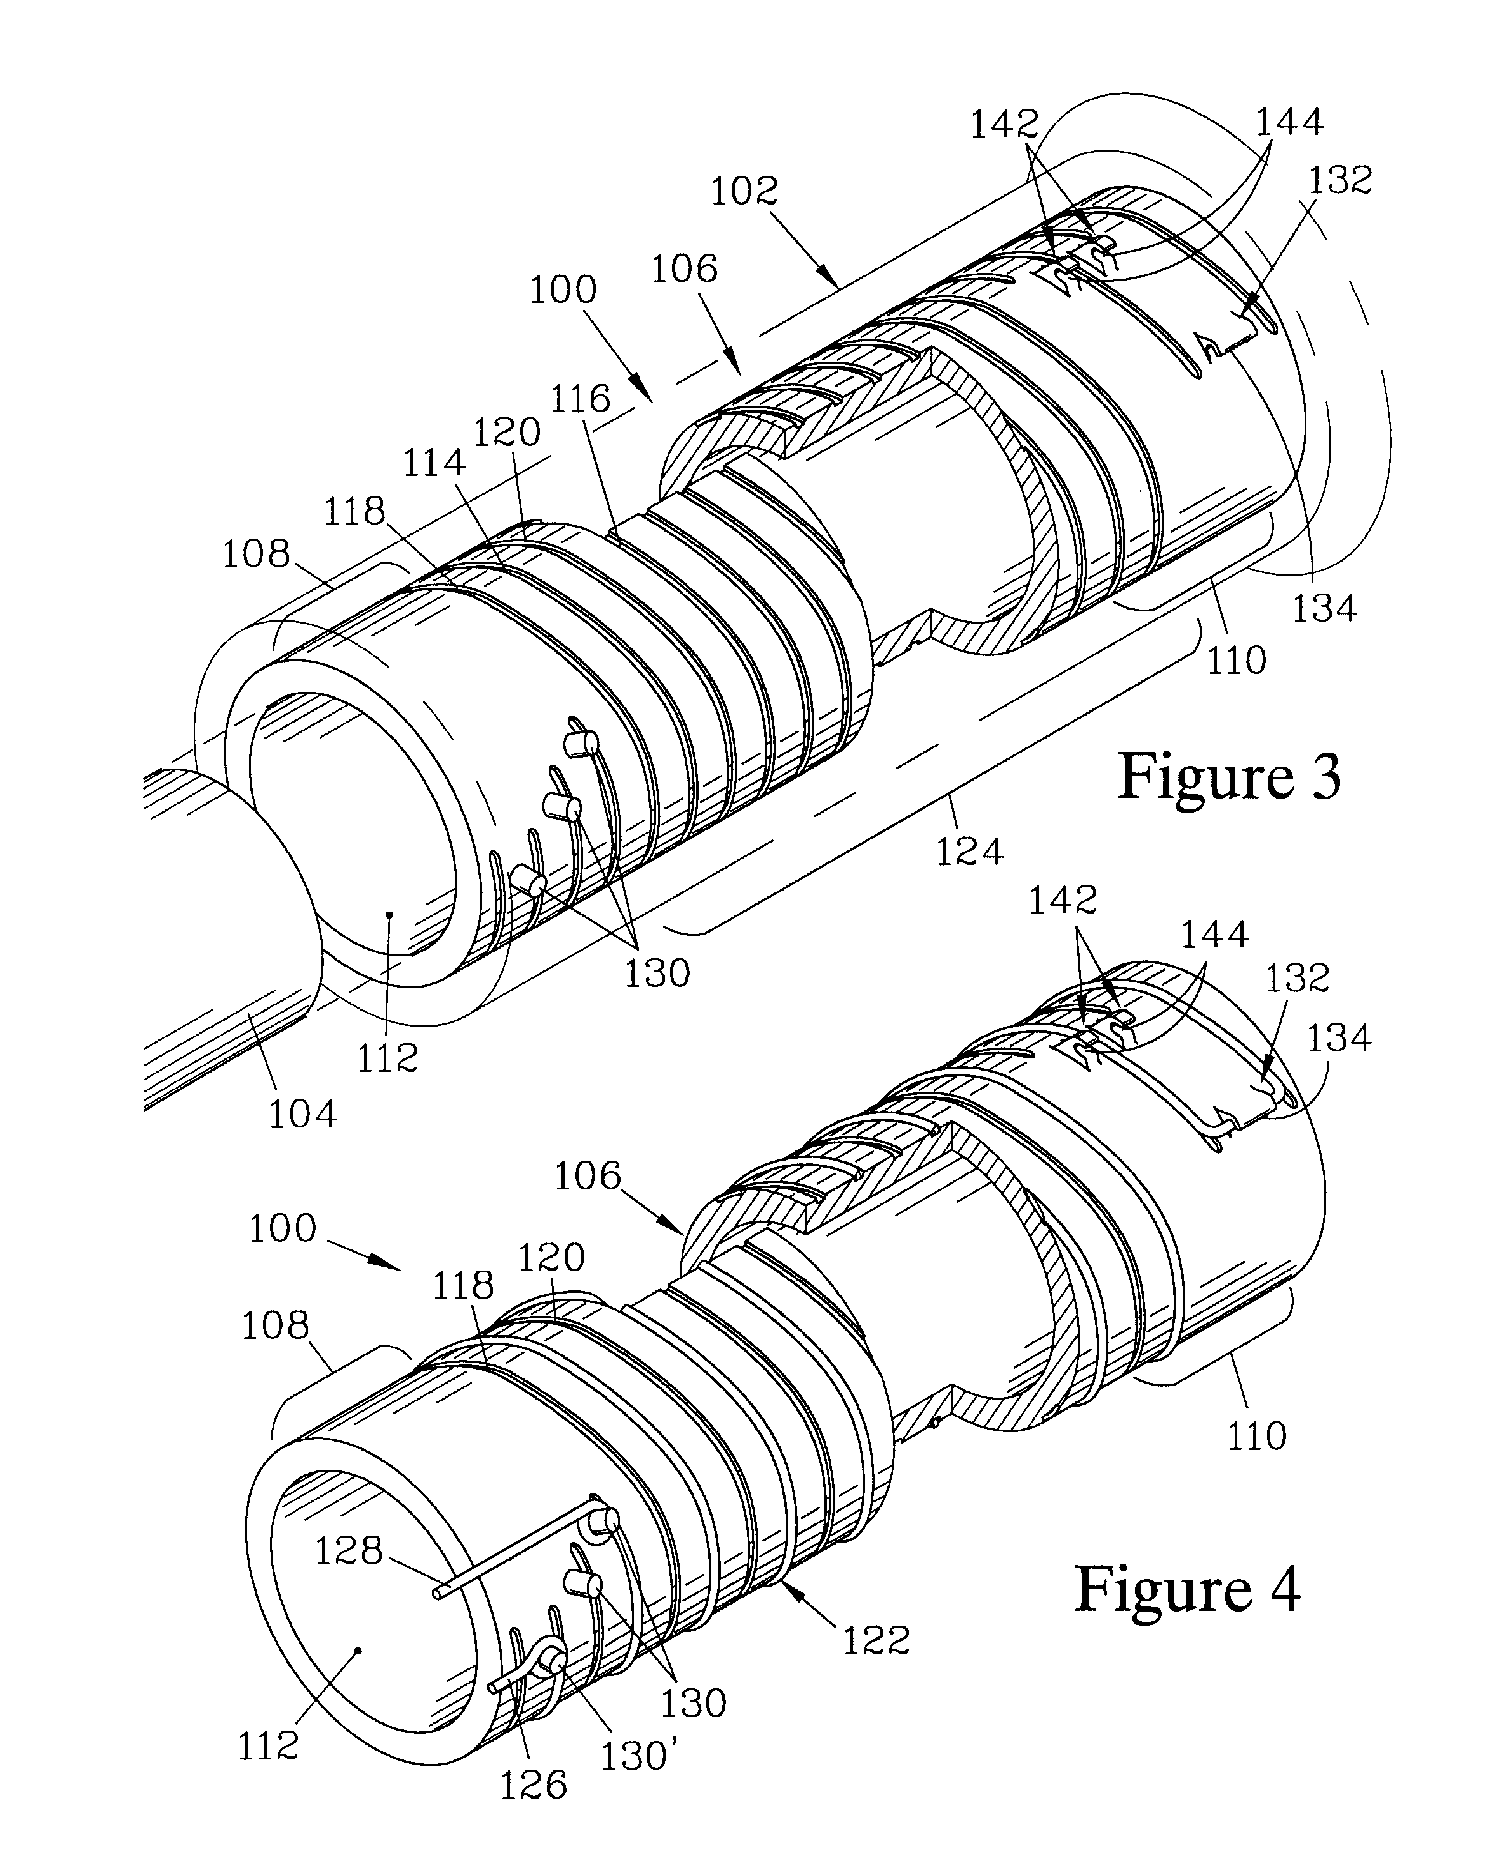 Two-circuit grip heater